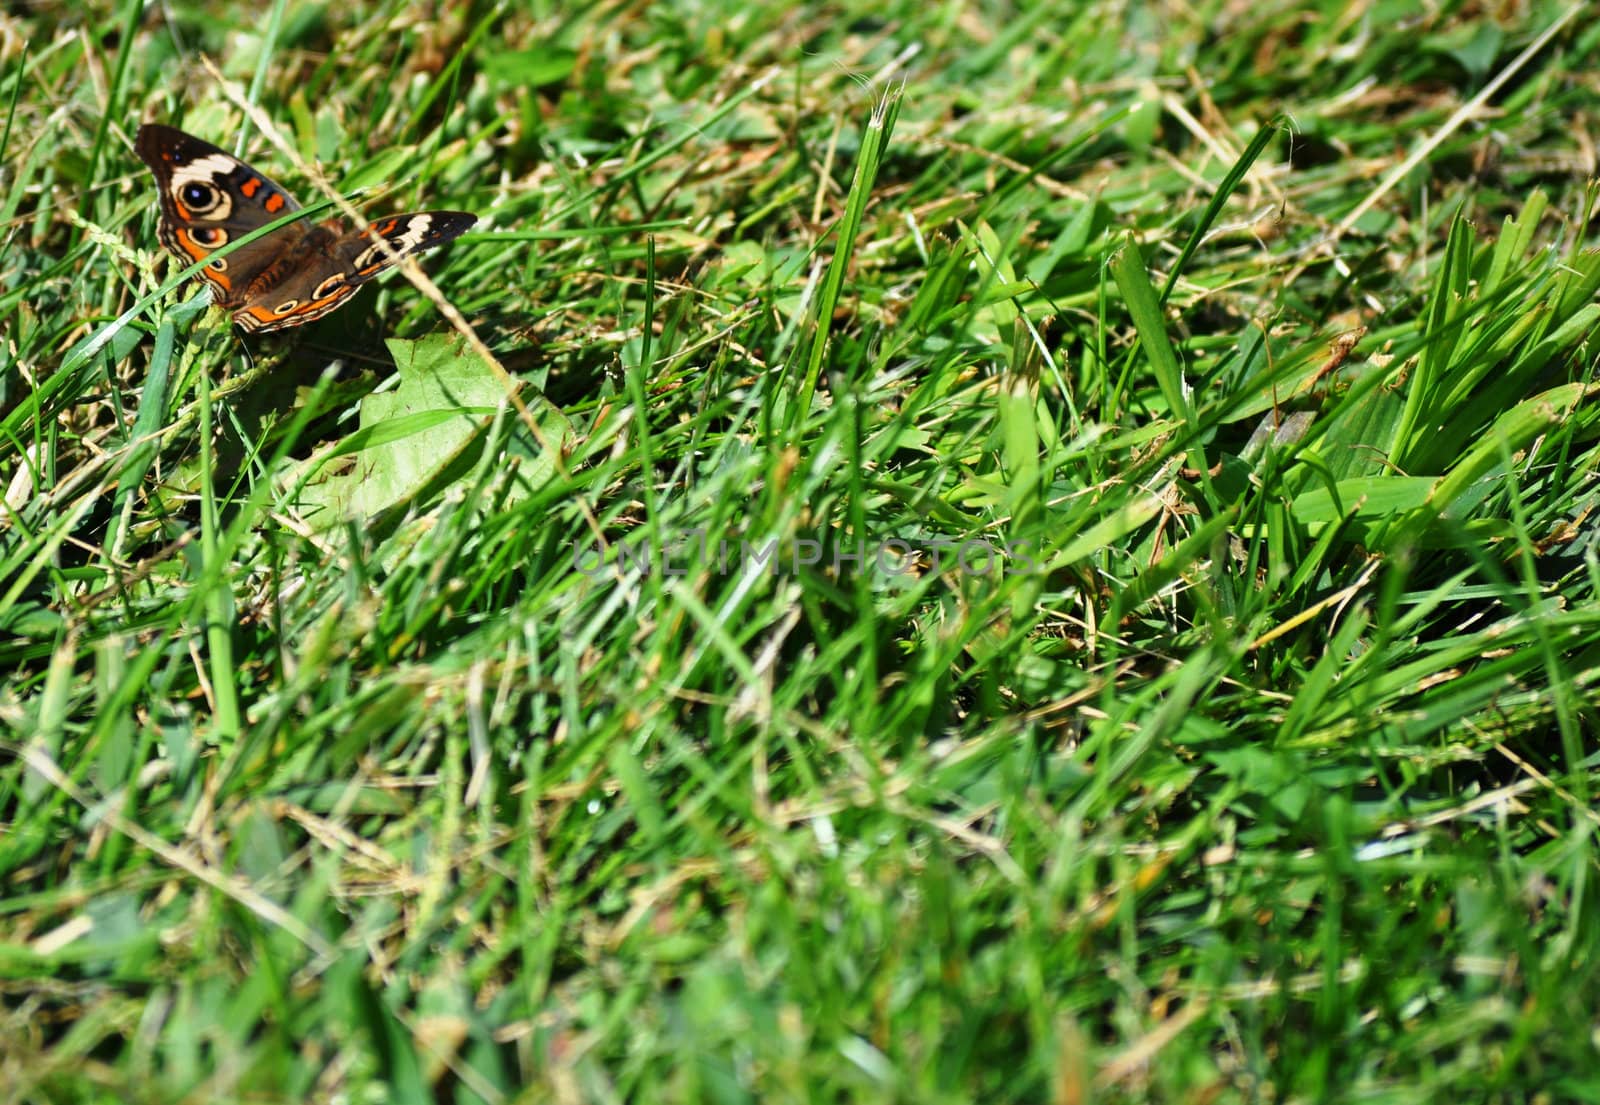 Butterfly on Grass Background